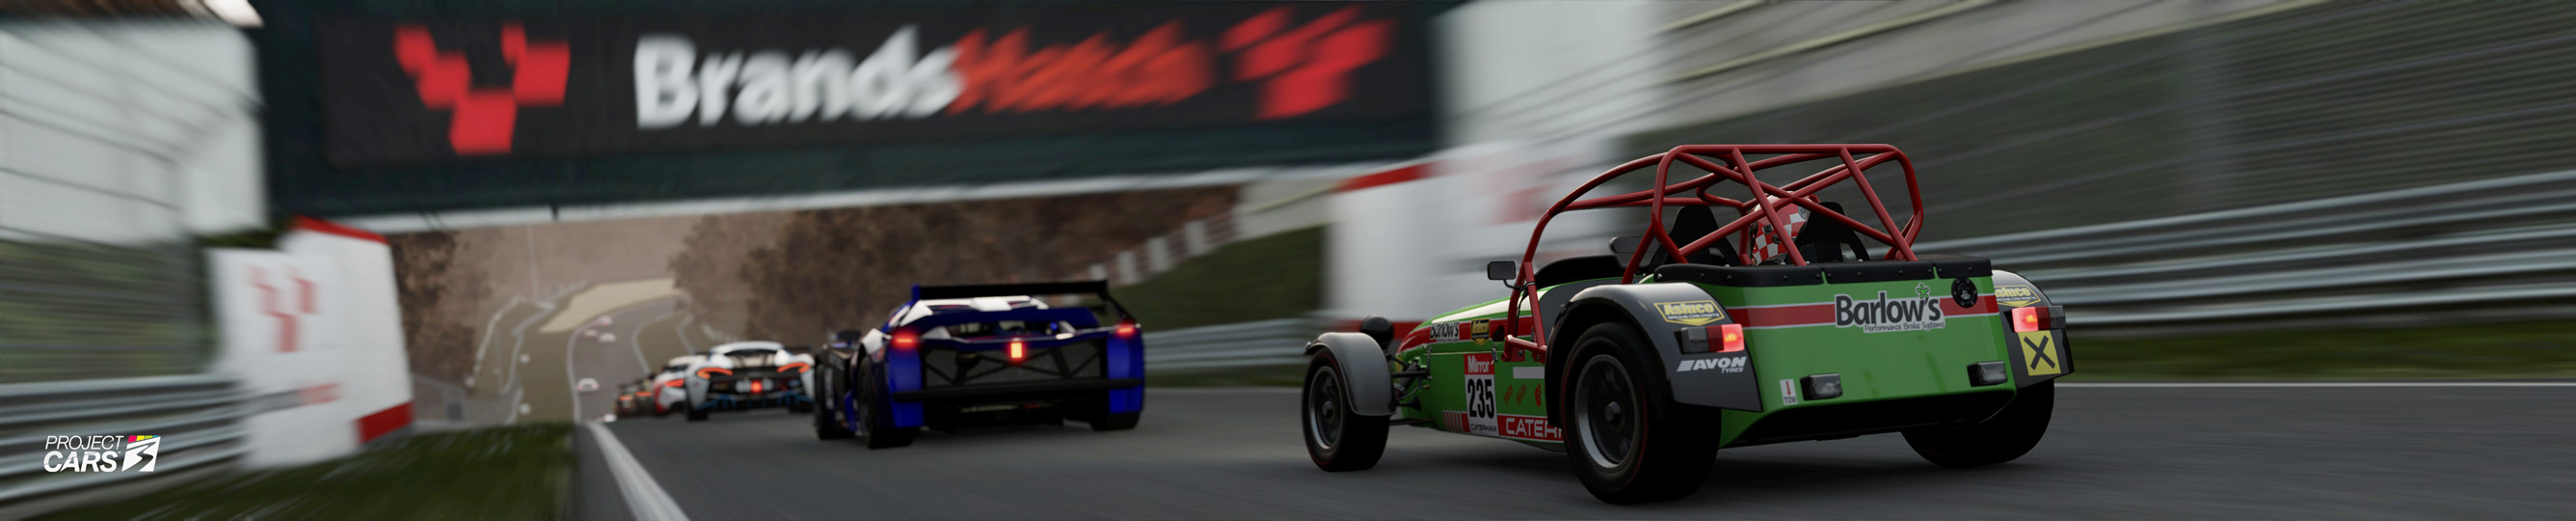 0 PROJECT CARS 3 CATERHAM 620R at BRANDS HATCH copy.jpg